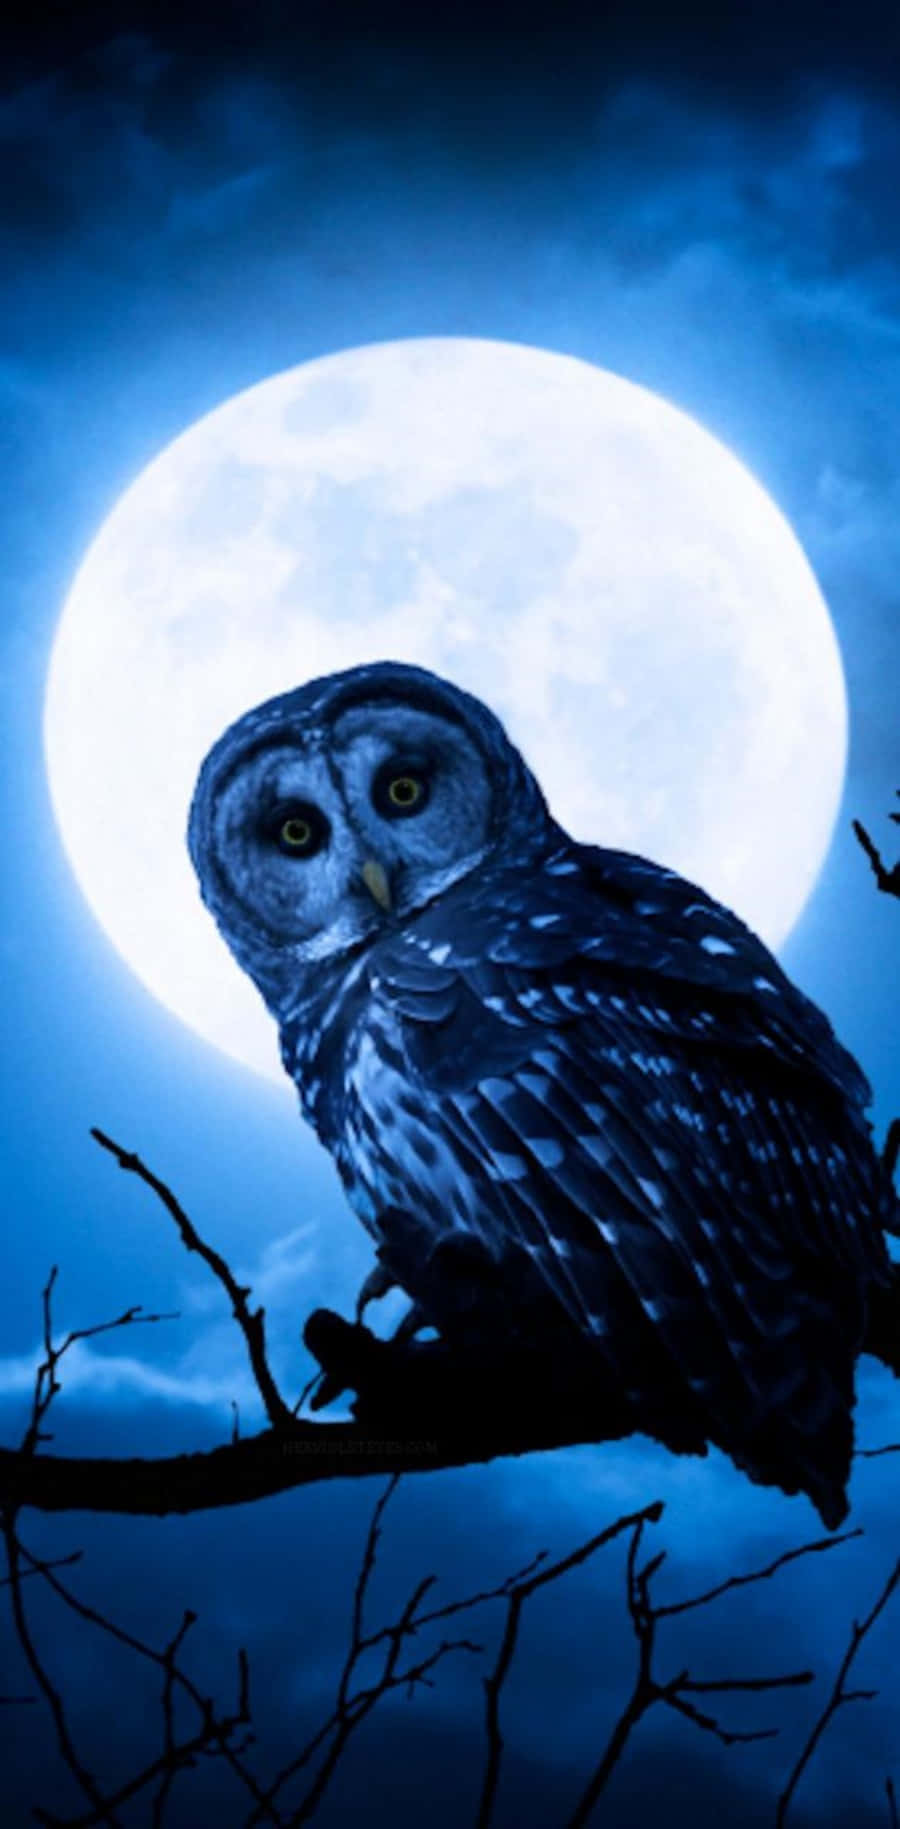 A majestic blue owl peers into the night